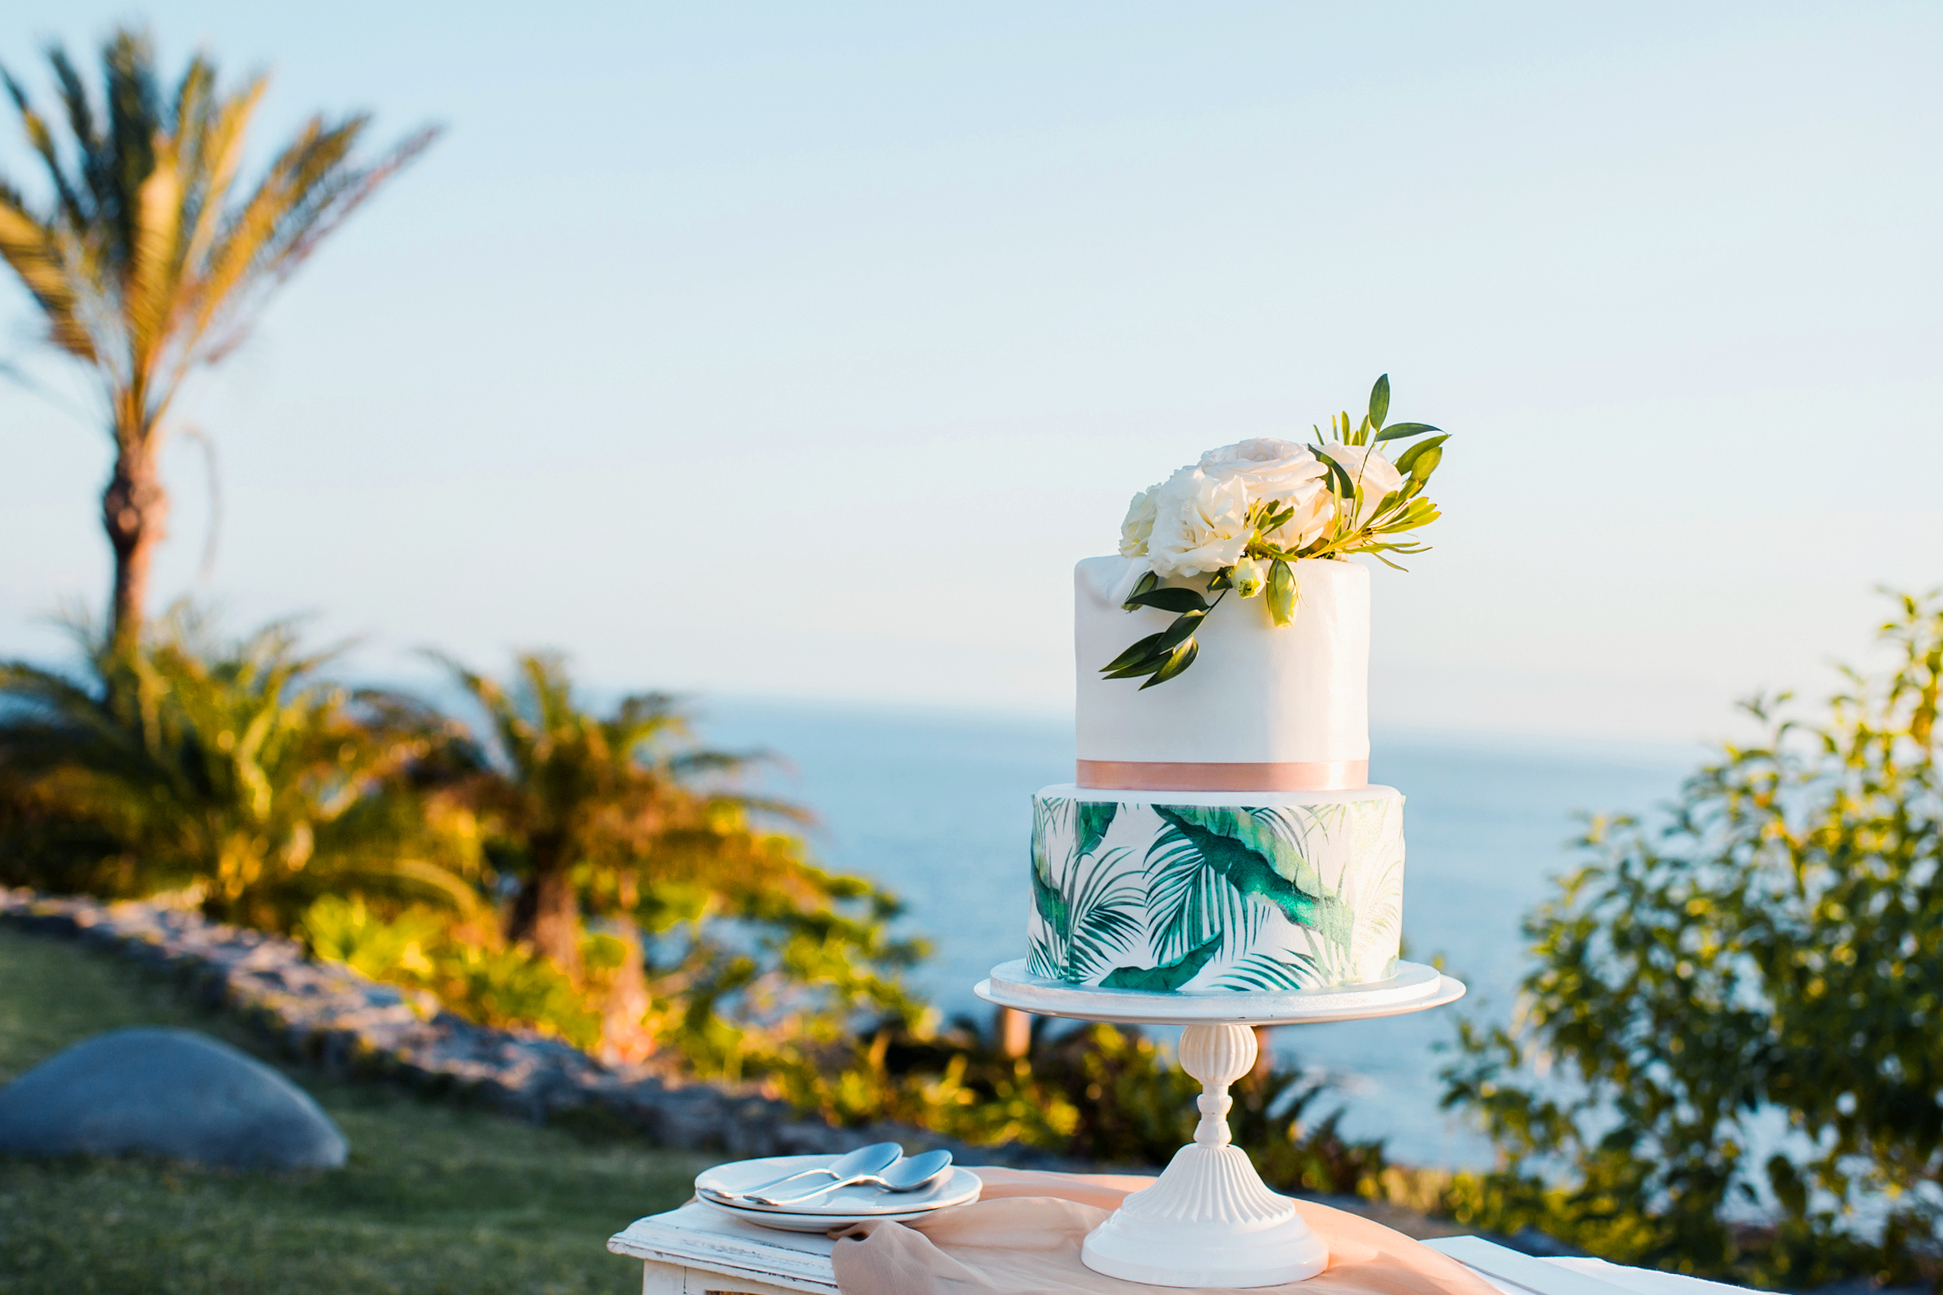 Tropical Decorated Cake